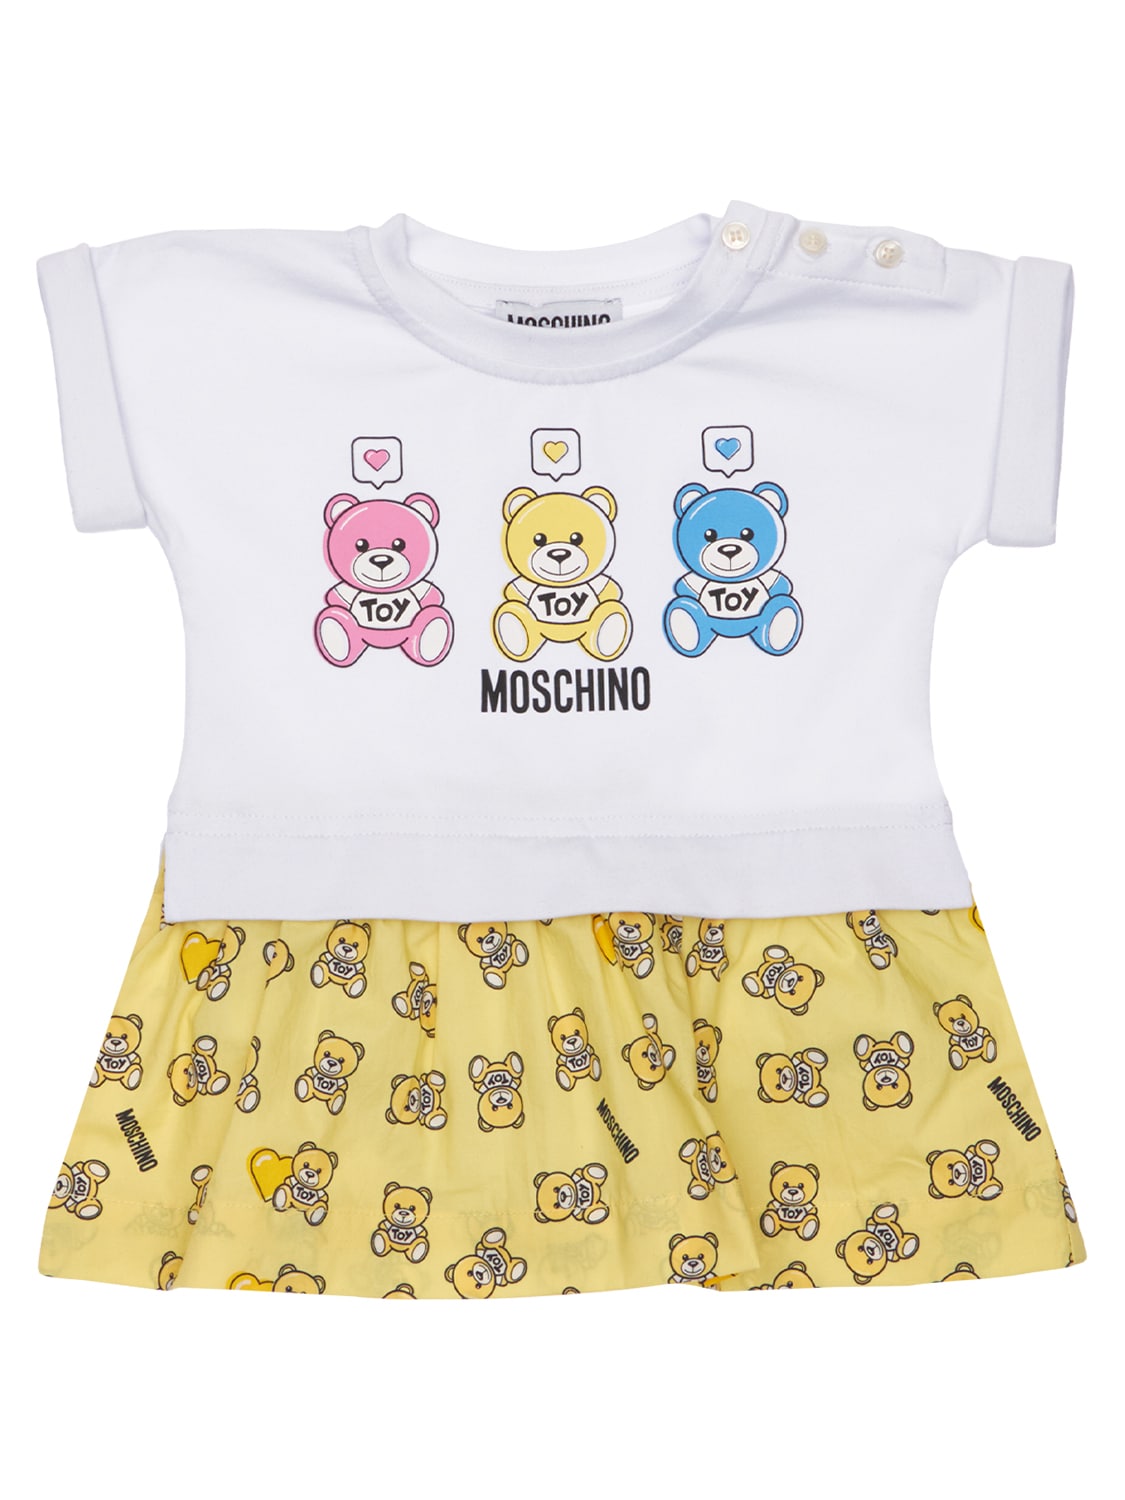 Moschino Babies' Cotton Jersey Bodysuit W/ Attached Skirt In White,yellow